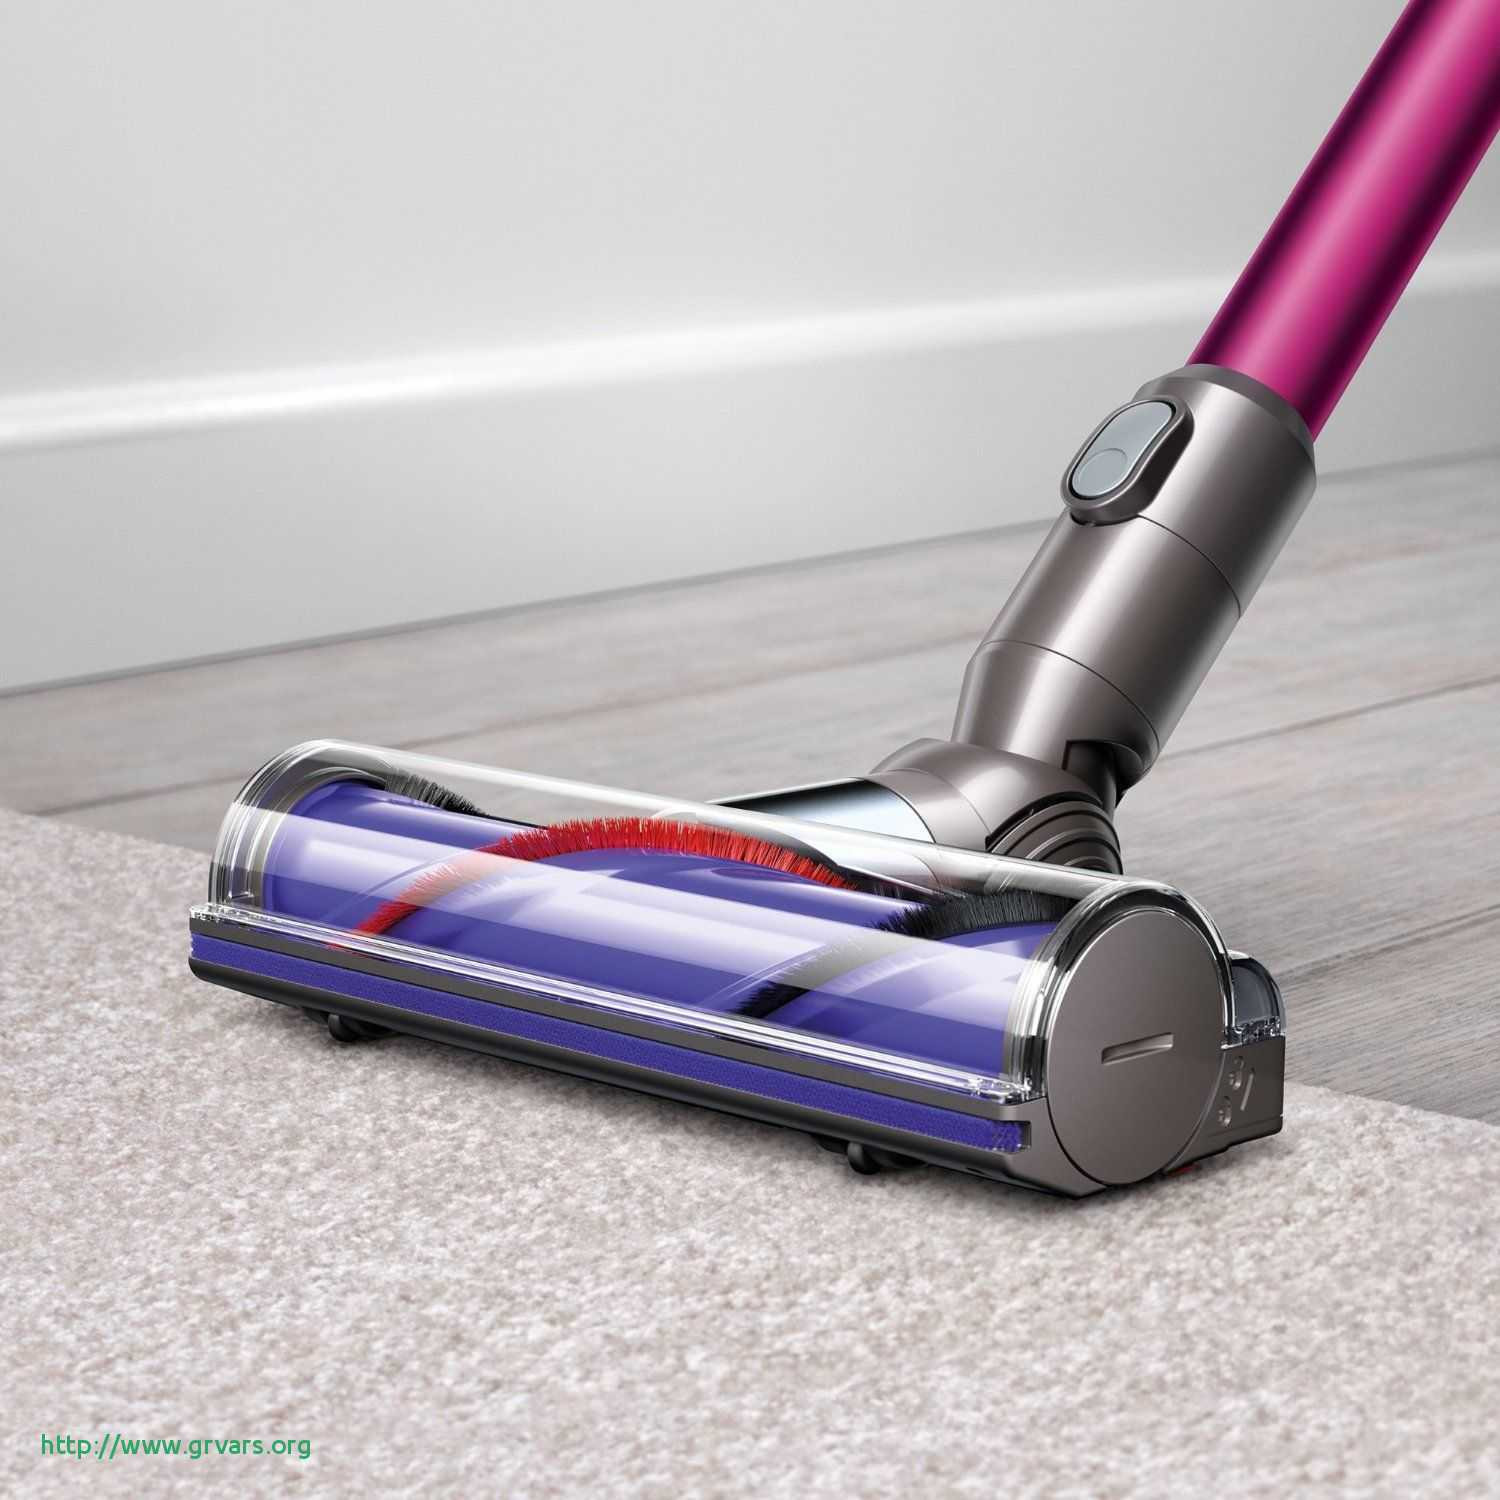 30 Trendy Best Stick Vacuum for Pet Hair On Hardwood Floors 2024 free download best stick vacuum for pet hair on hardwood floors of 16 luxe good vacuum for carpet and hardwood floor ideas blog intended for 15 most useful gad s for cleaning and laundry best cordless vac